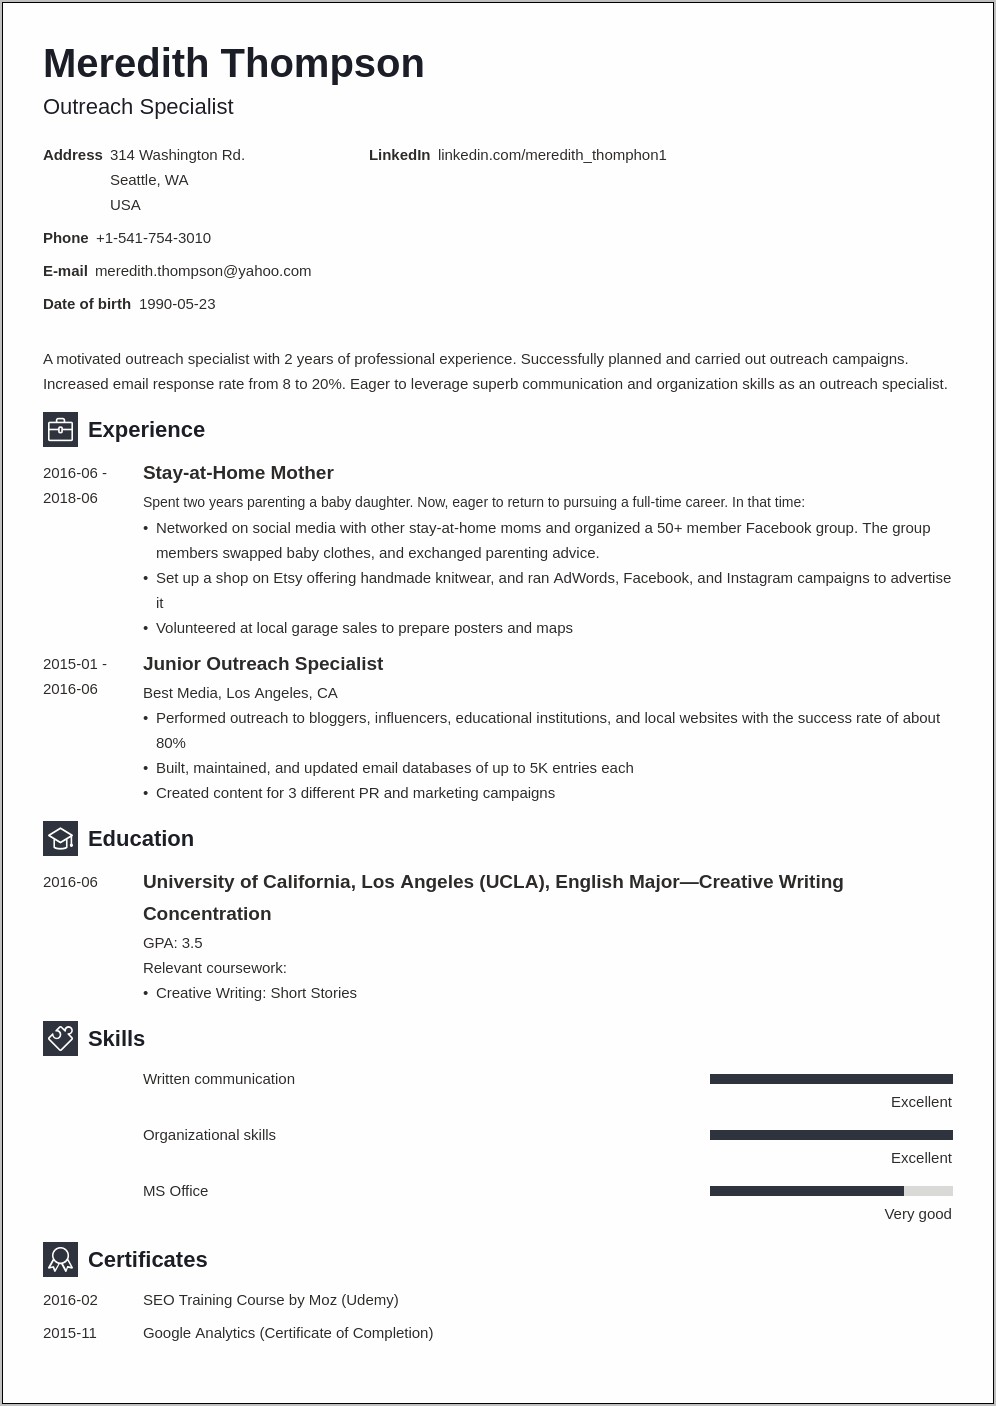 Objective For Resume New To The Workforce